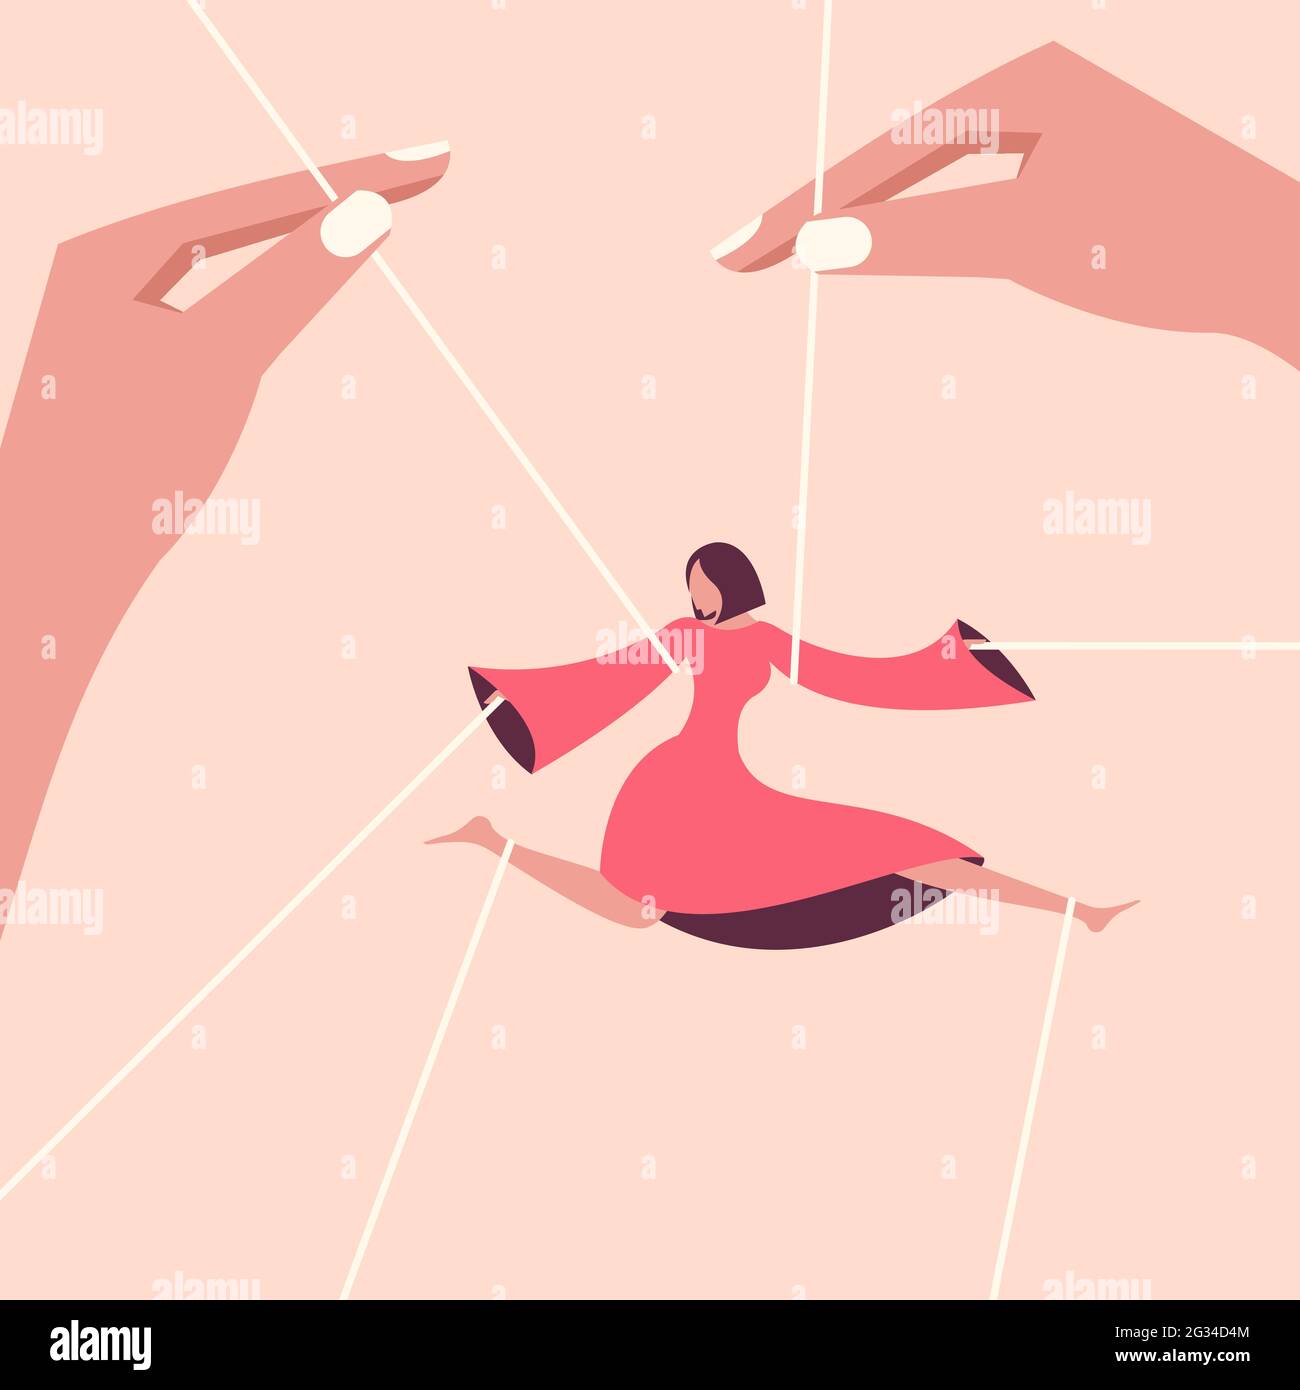 Conceptual illustration of hands controlling a dancing girl tied with strings Stock Vector